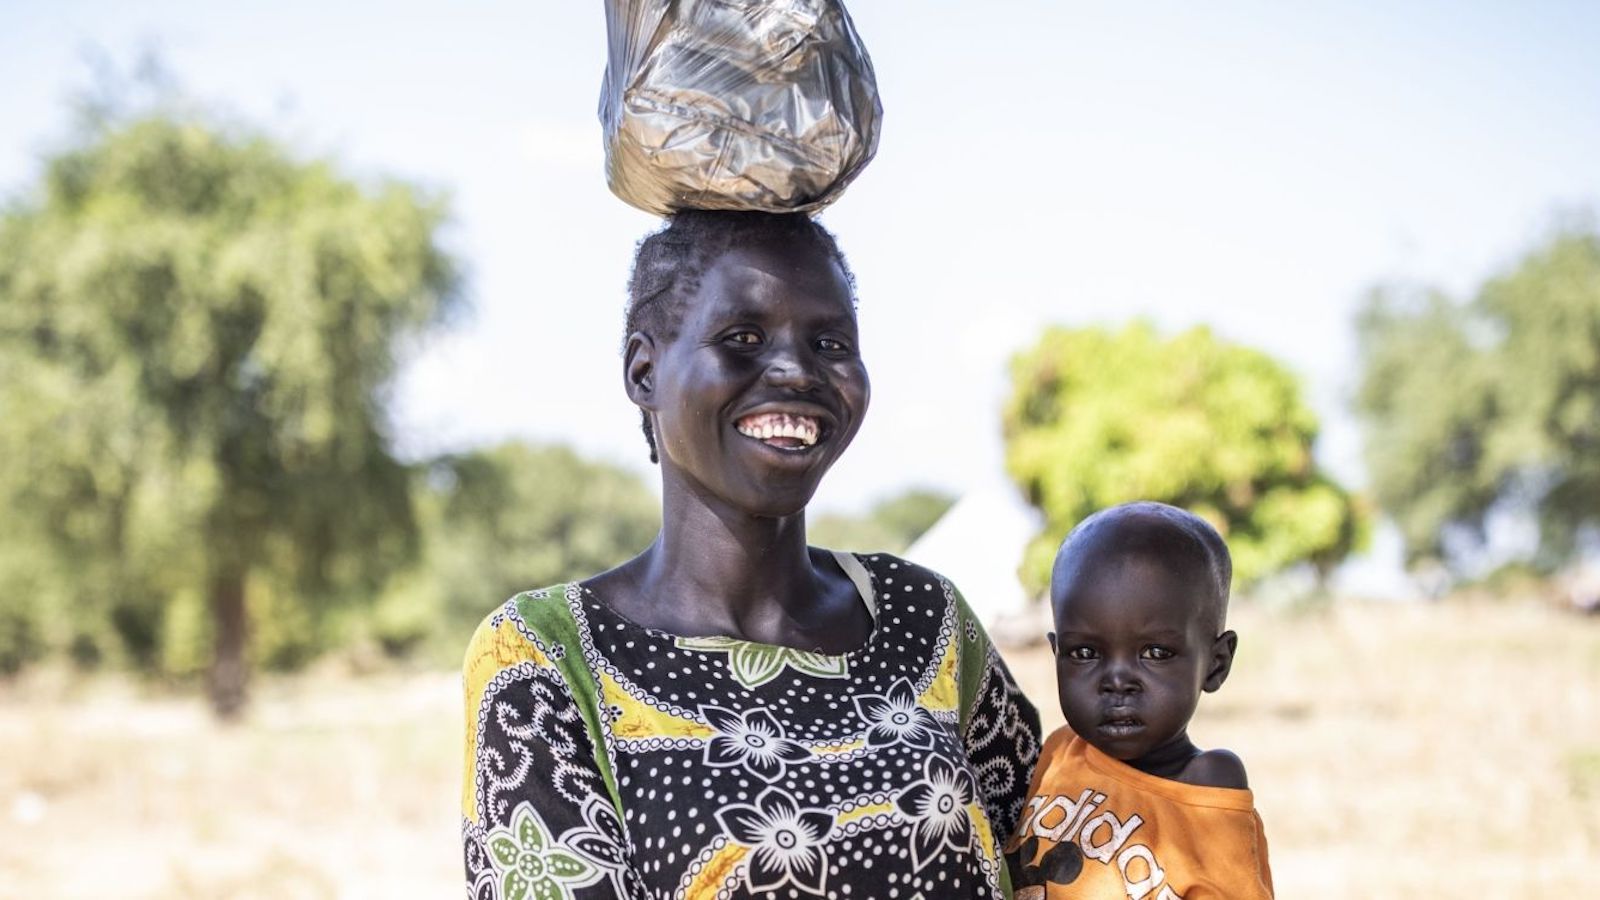 Nyibar holds infant son in her arms and balances bag on her head in South Sudan